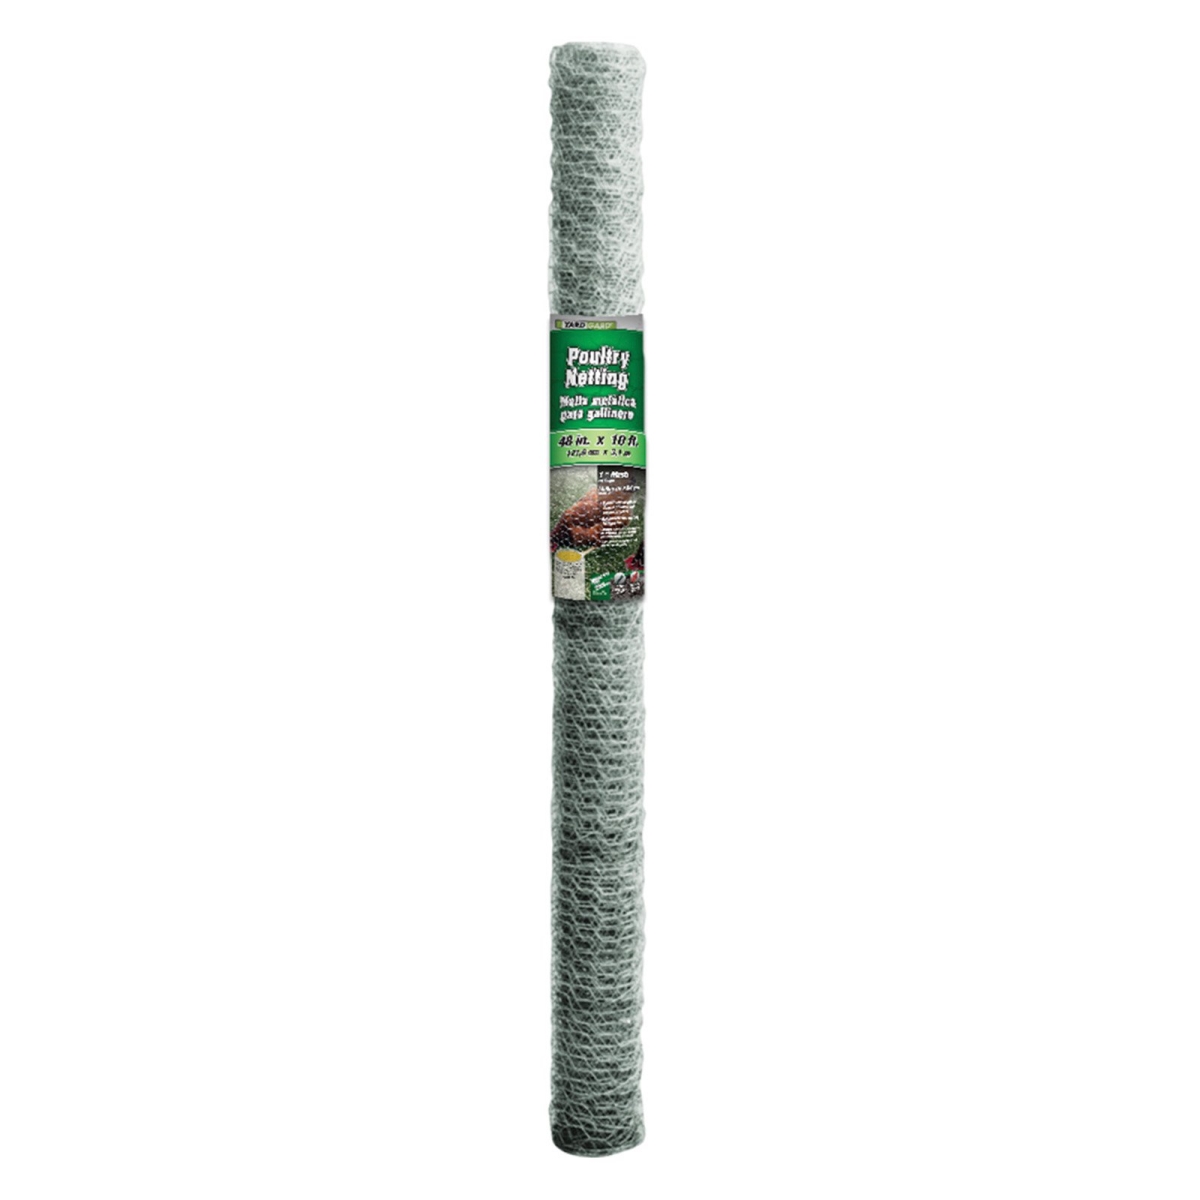 308420b 4 X 10 Ft. 1 In. Mesh Poultry Netting